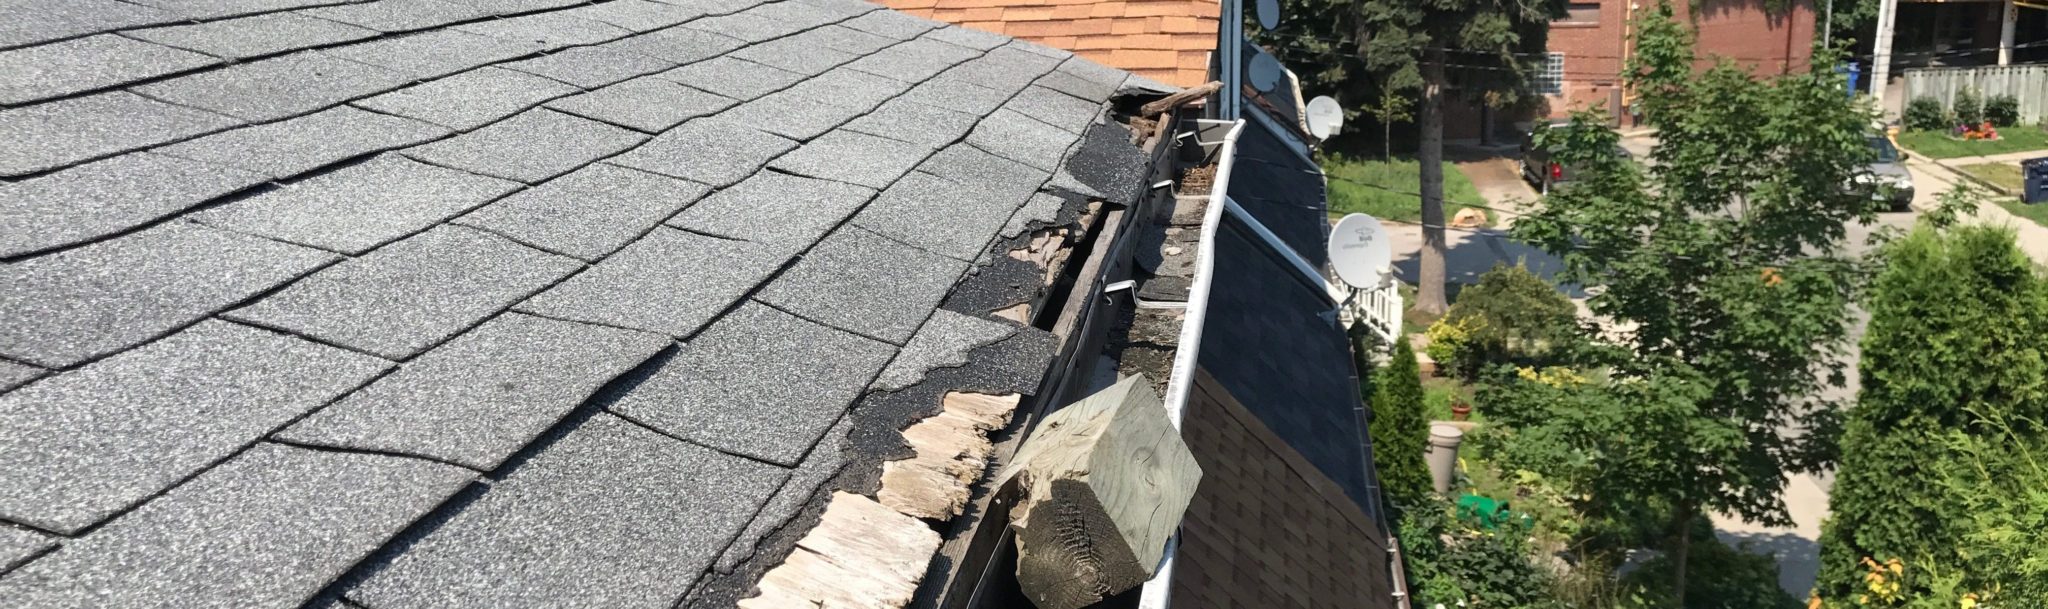 Raccoons Did This Shingle Damage In One Night